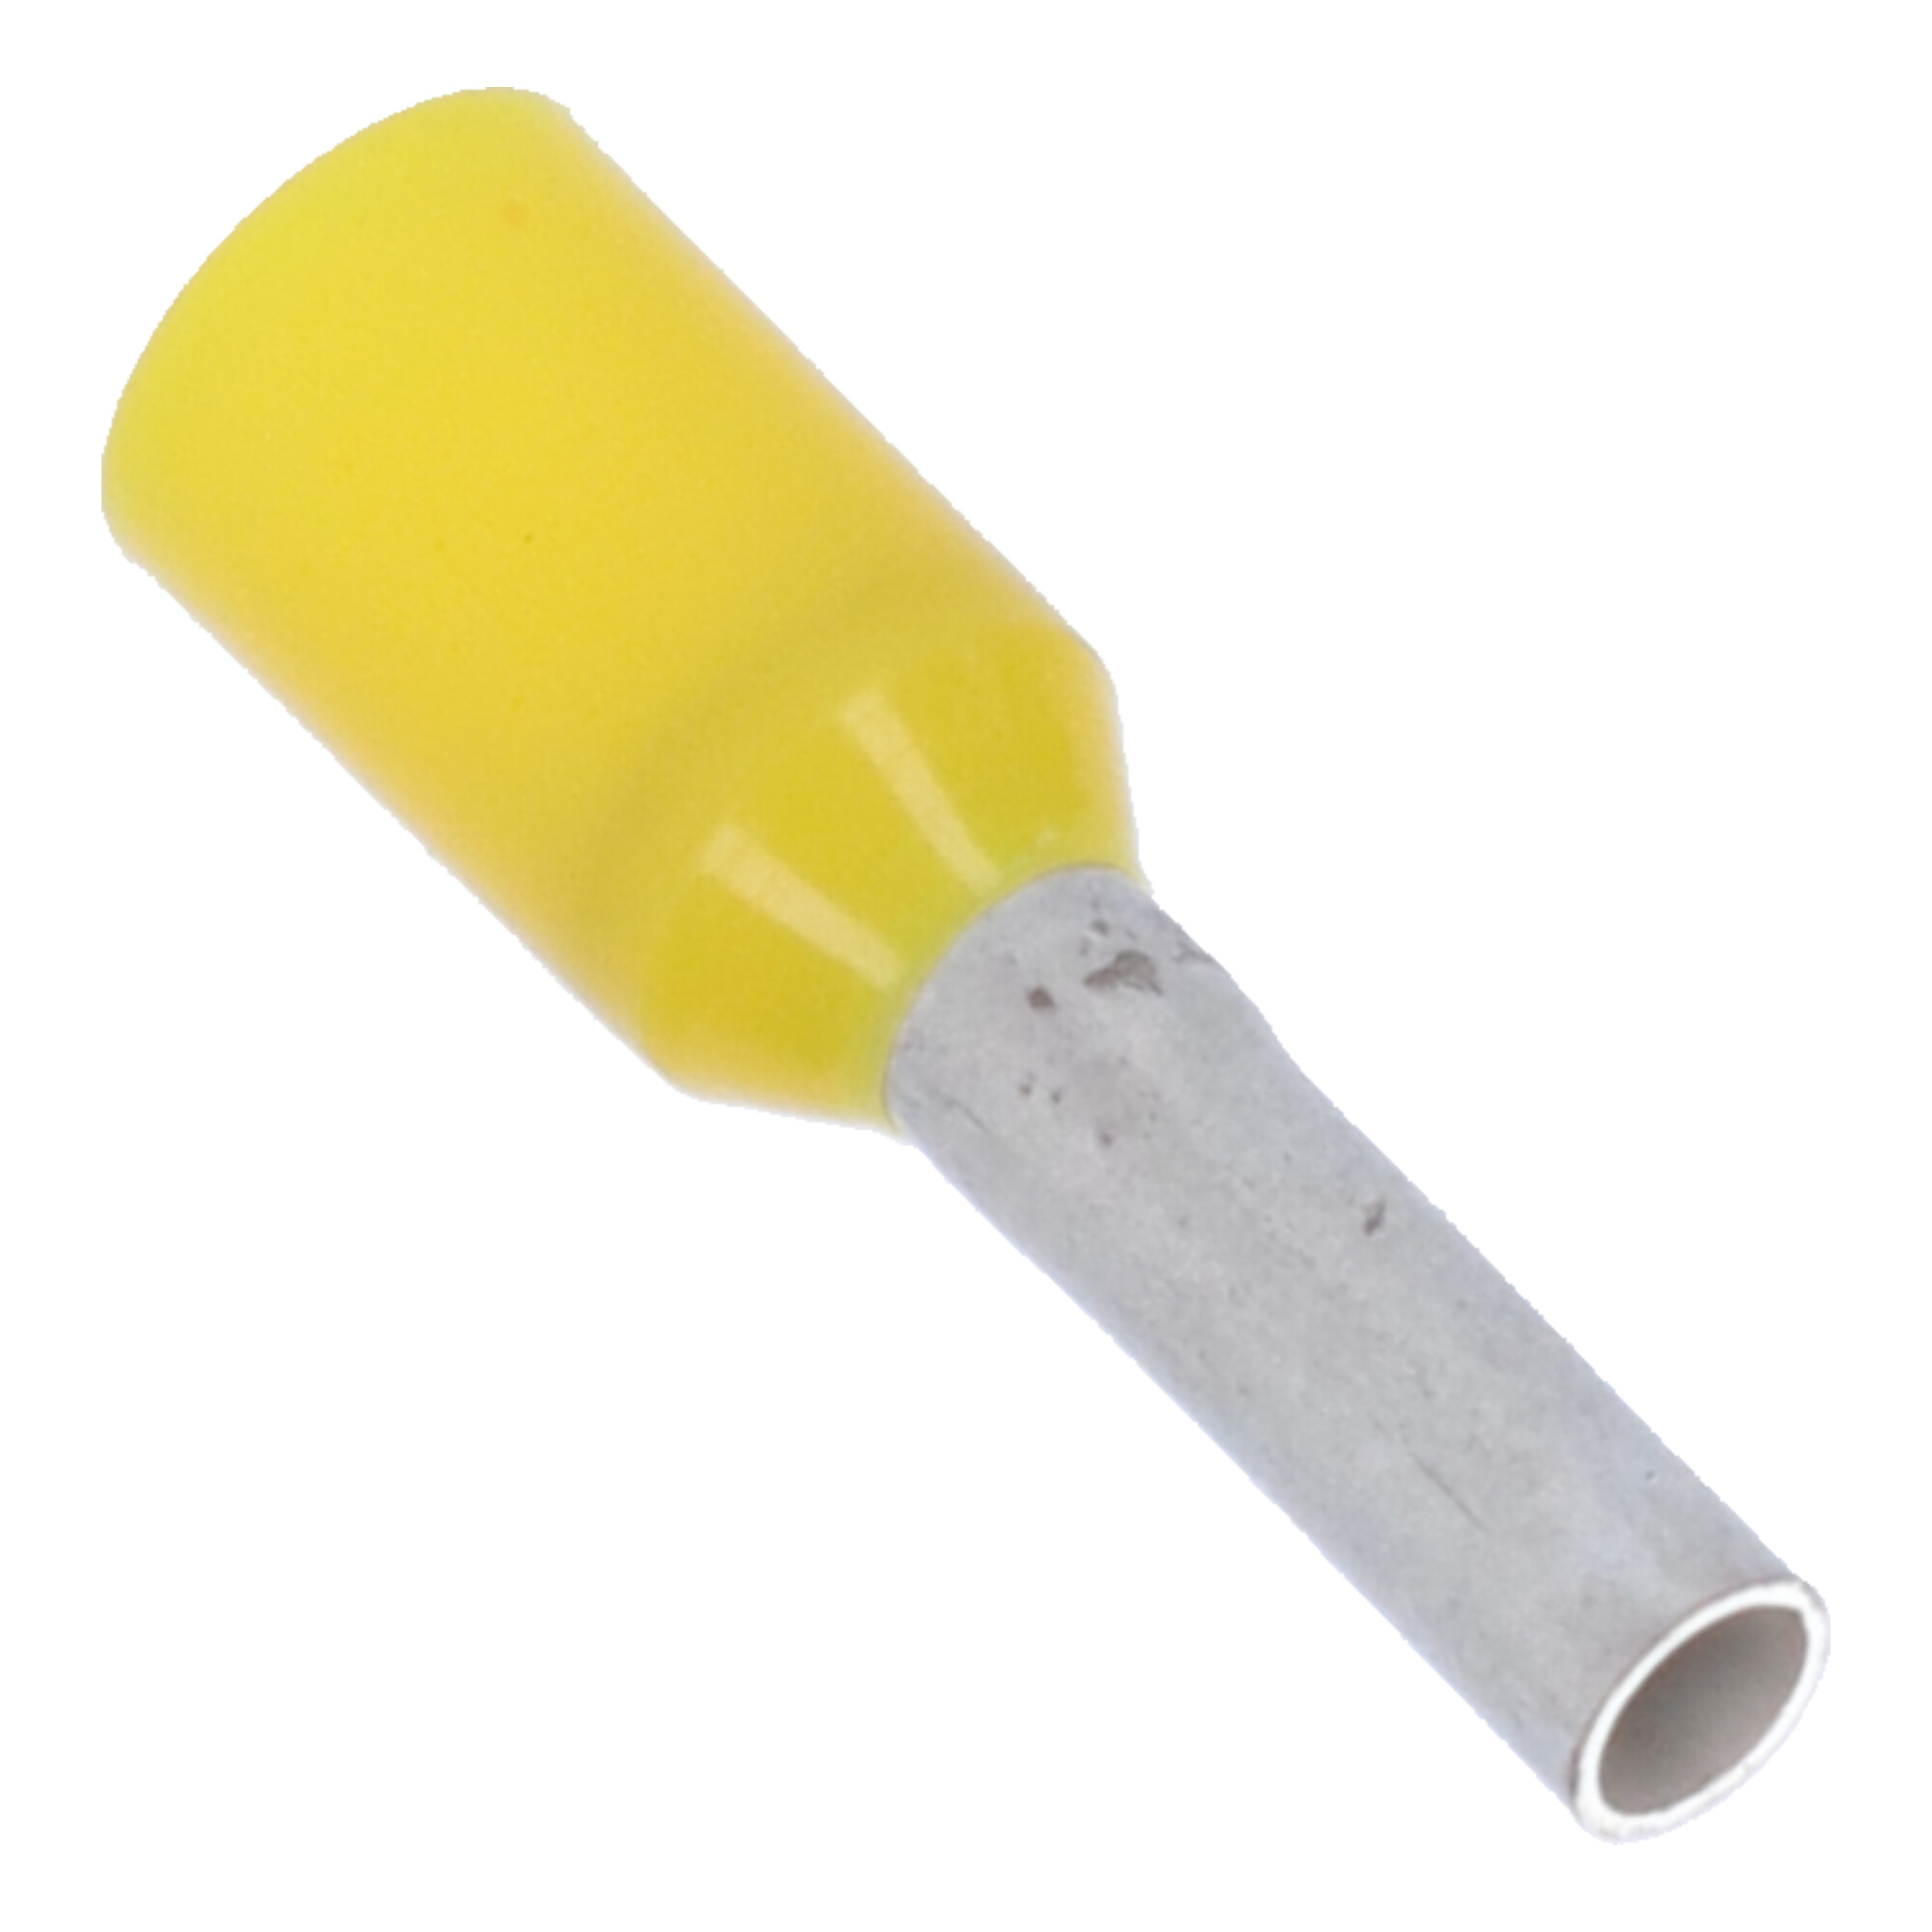 15-01037 Insulated wire end sleeve